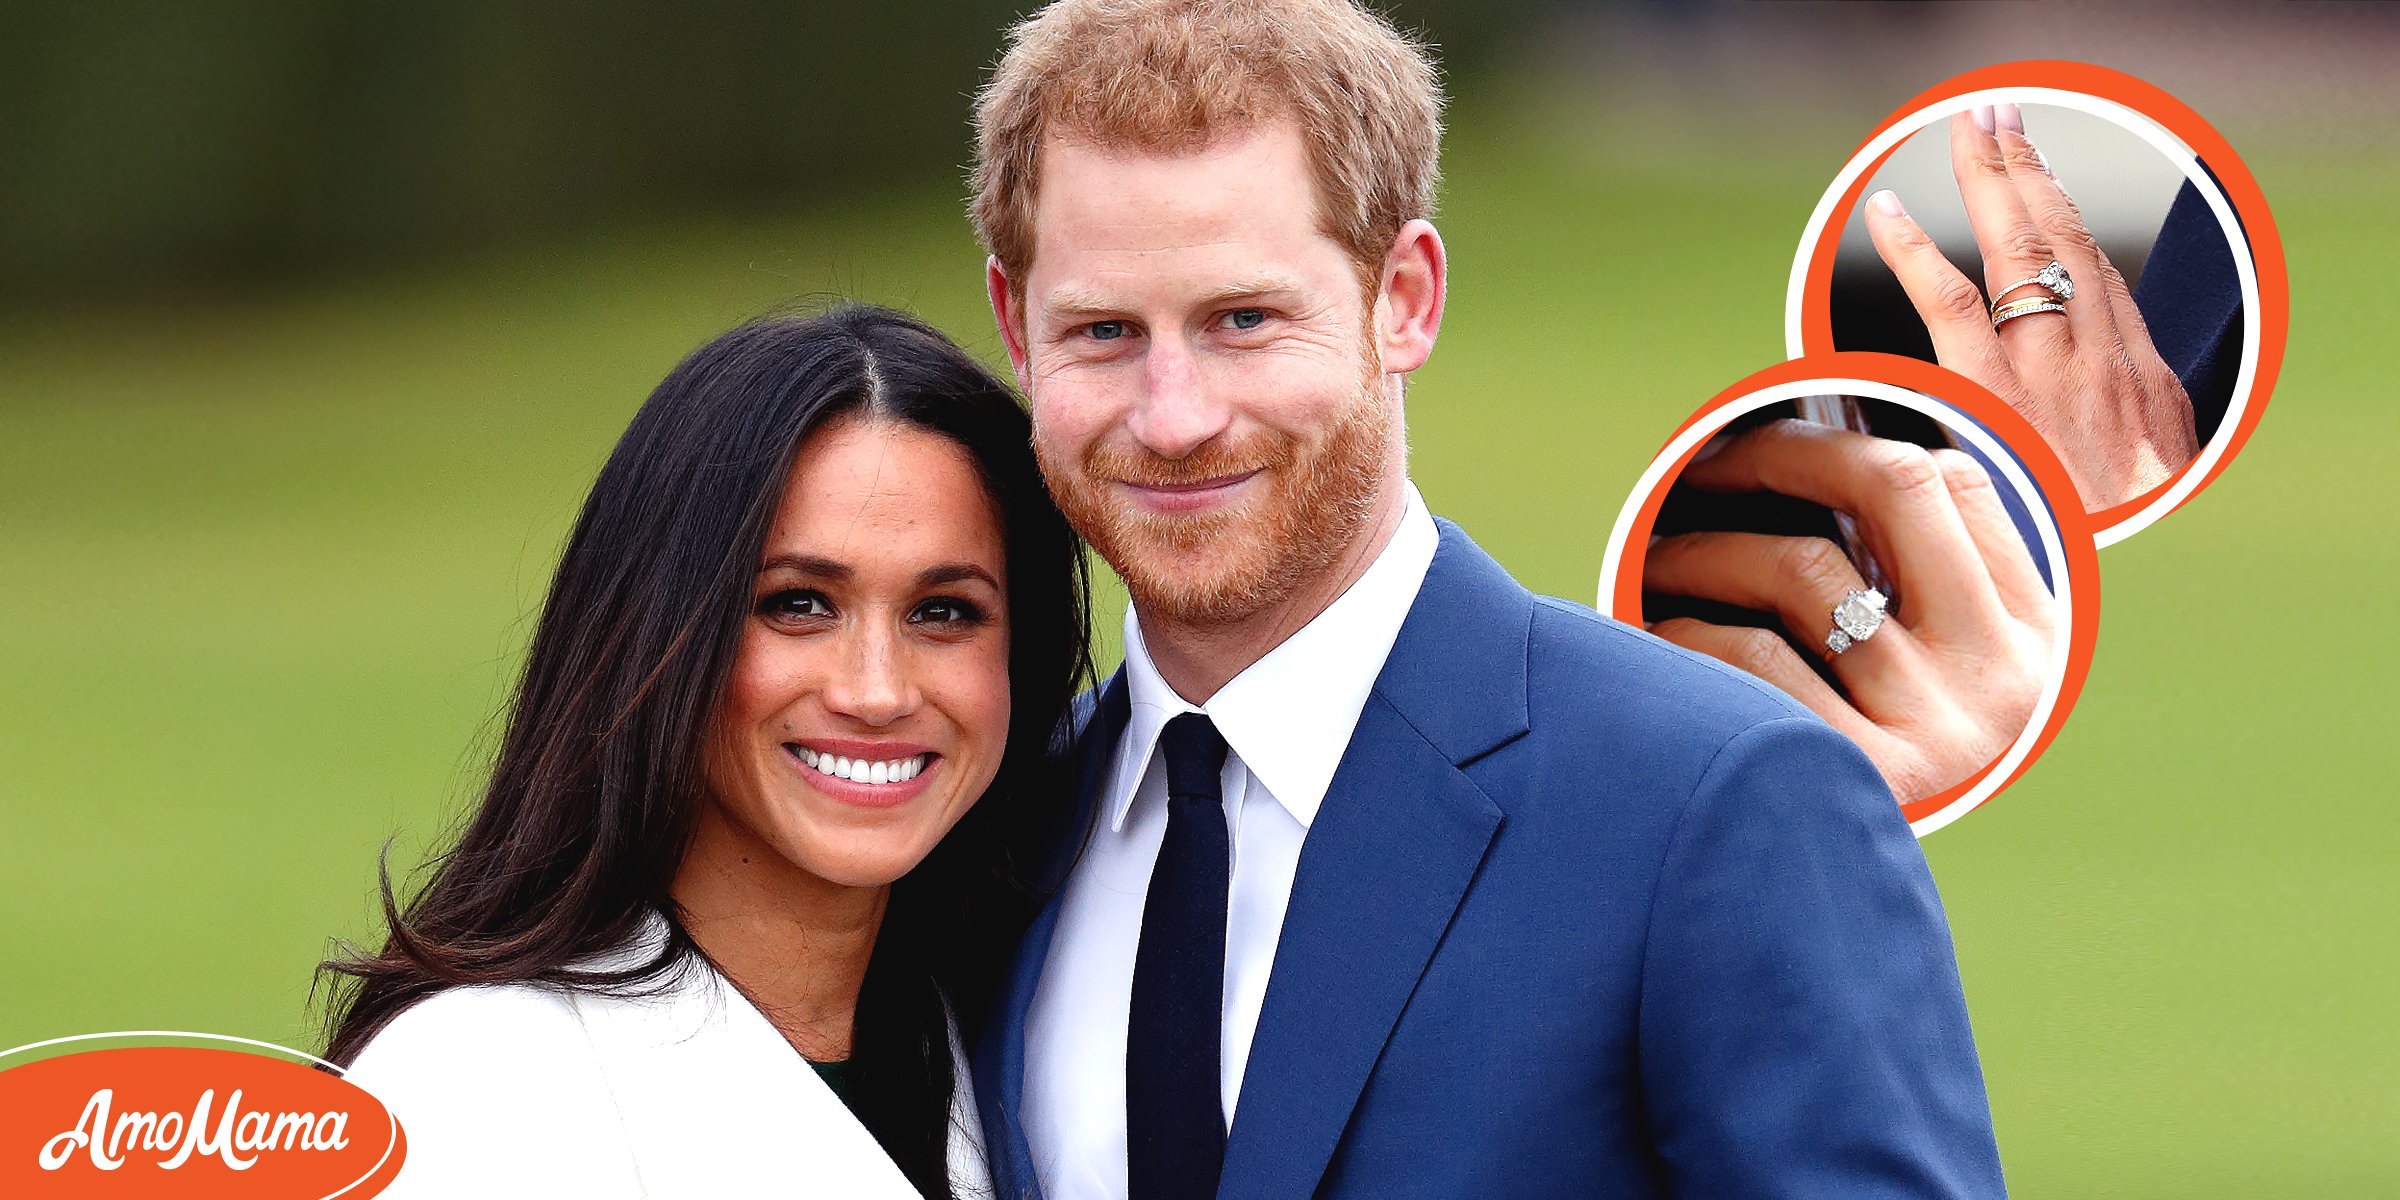 Prince Harry Knew Meghan ‘Was the One’ — She Changed Her Ring after Private Engagement before Telling the Public